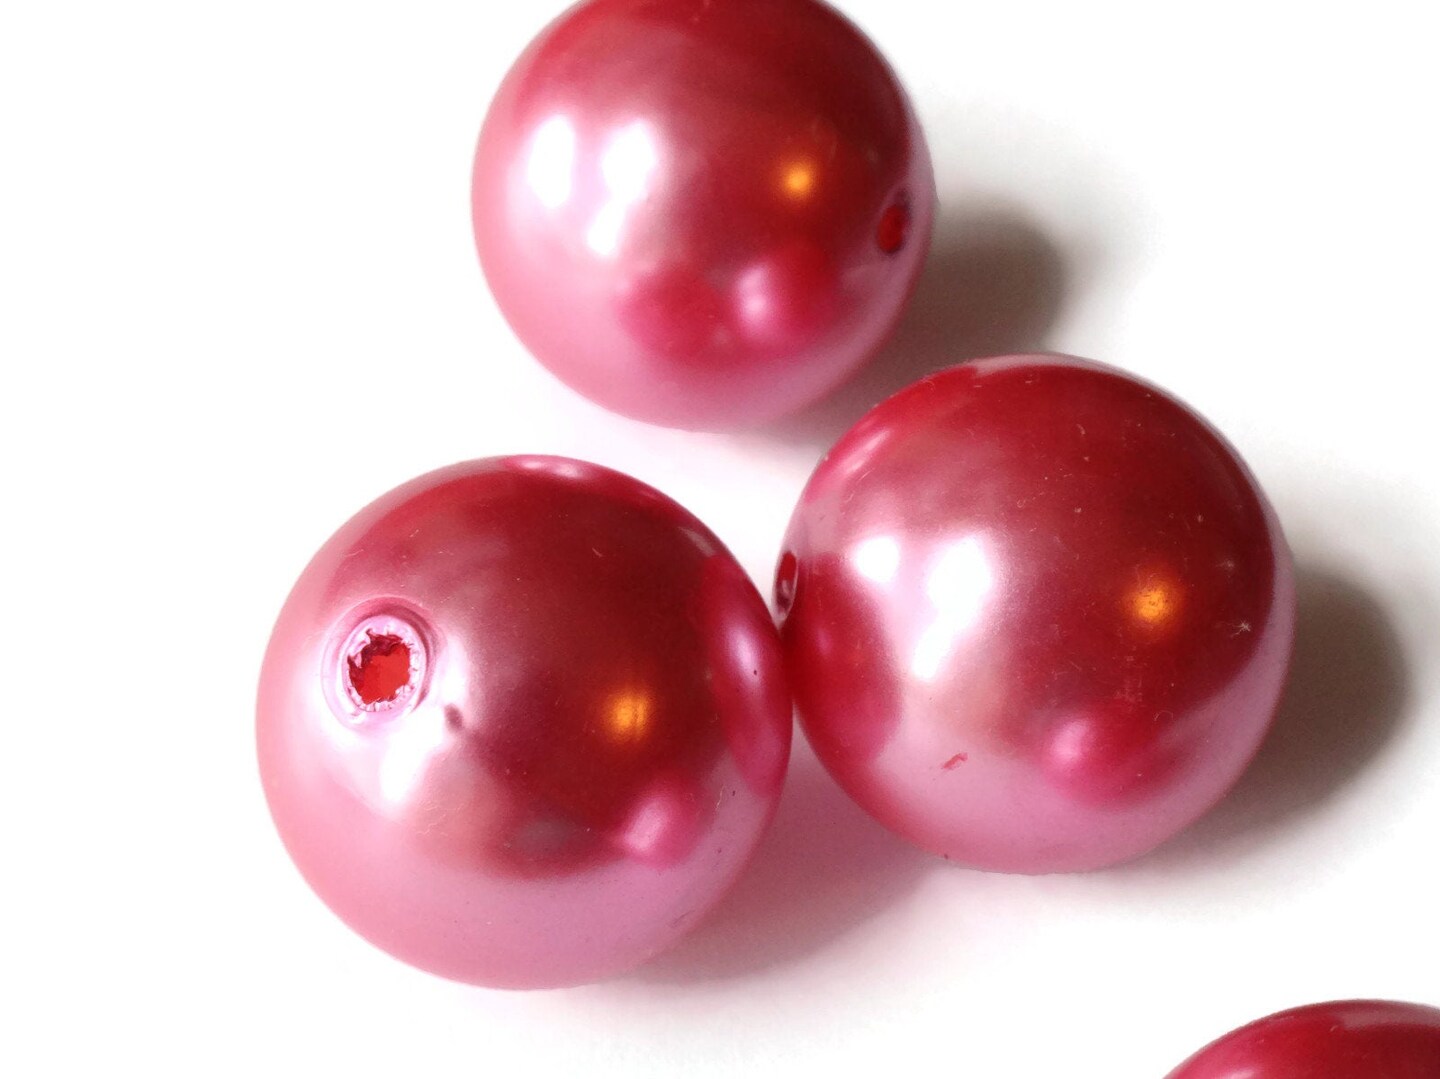 5 26mm Round Pink Pearls Faux Plastic Pearl Beads